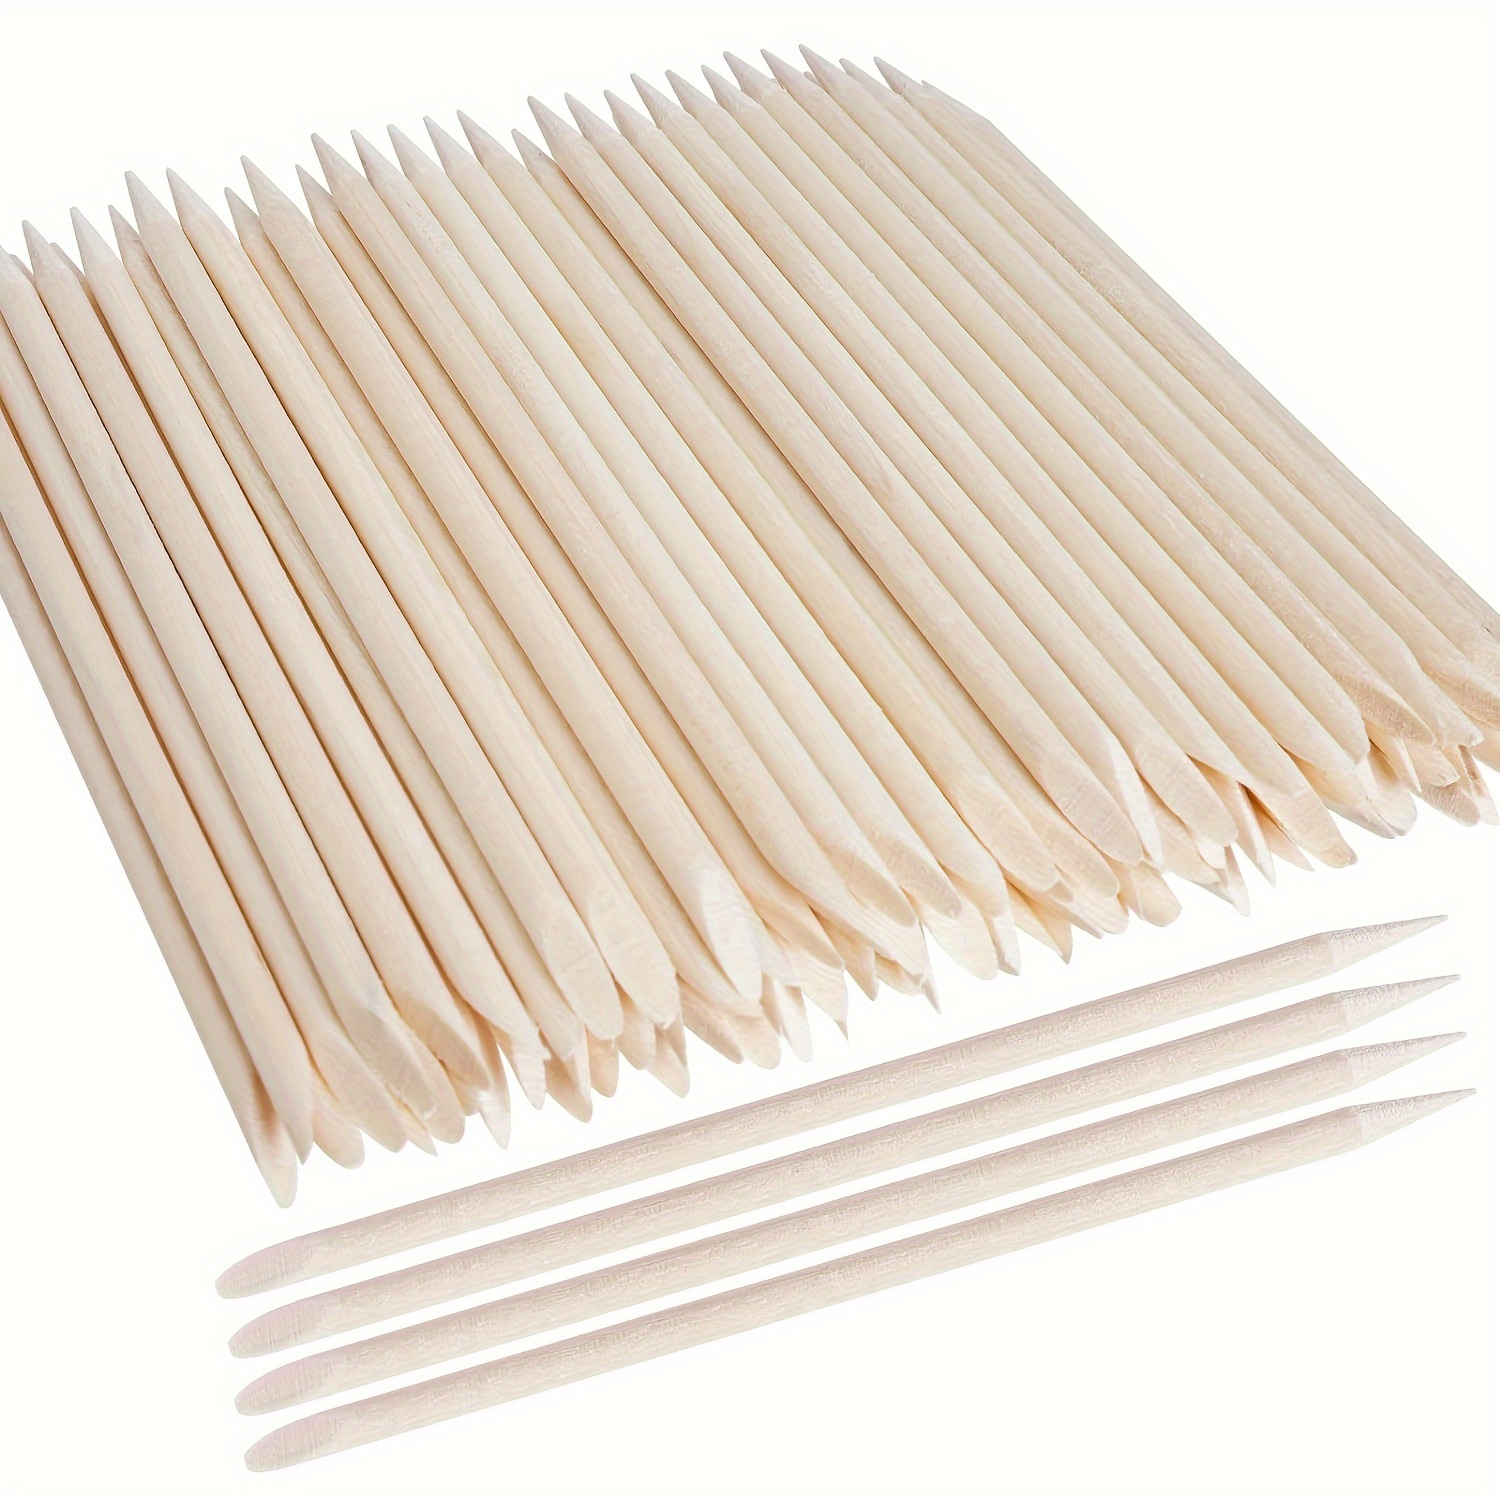 

100-500pcs Wooden Waxing Sticks Mini Applicators For Hair Removal, Wax Spatulas For Facial, Lip, Nose, Eyebrow, Home & Spa Use With Precision Pointed Tip For Smooth Skin